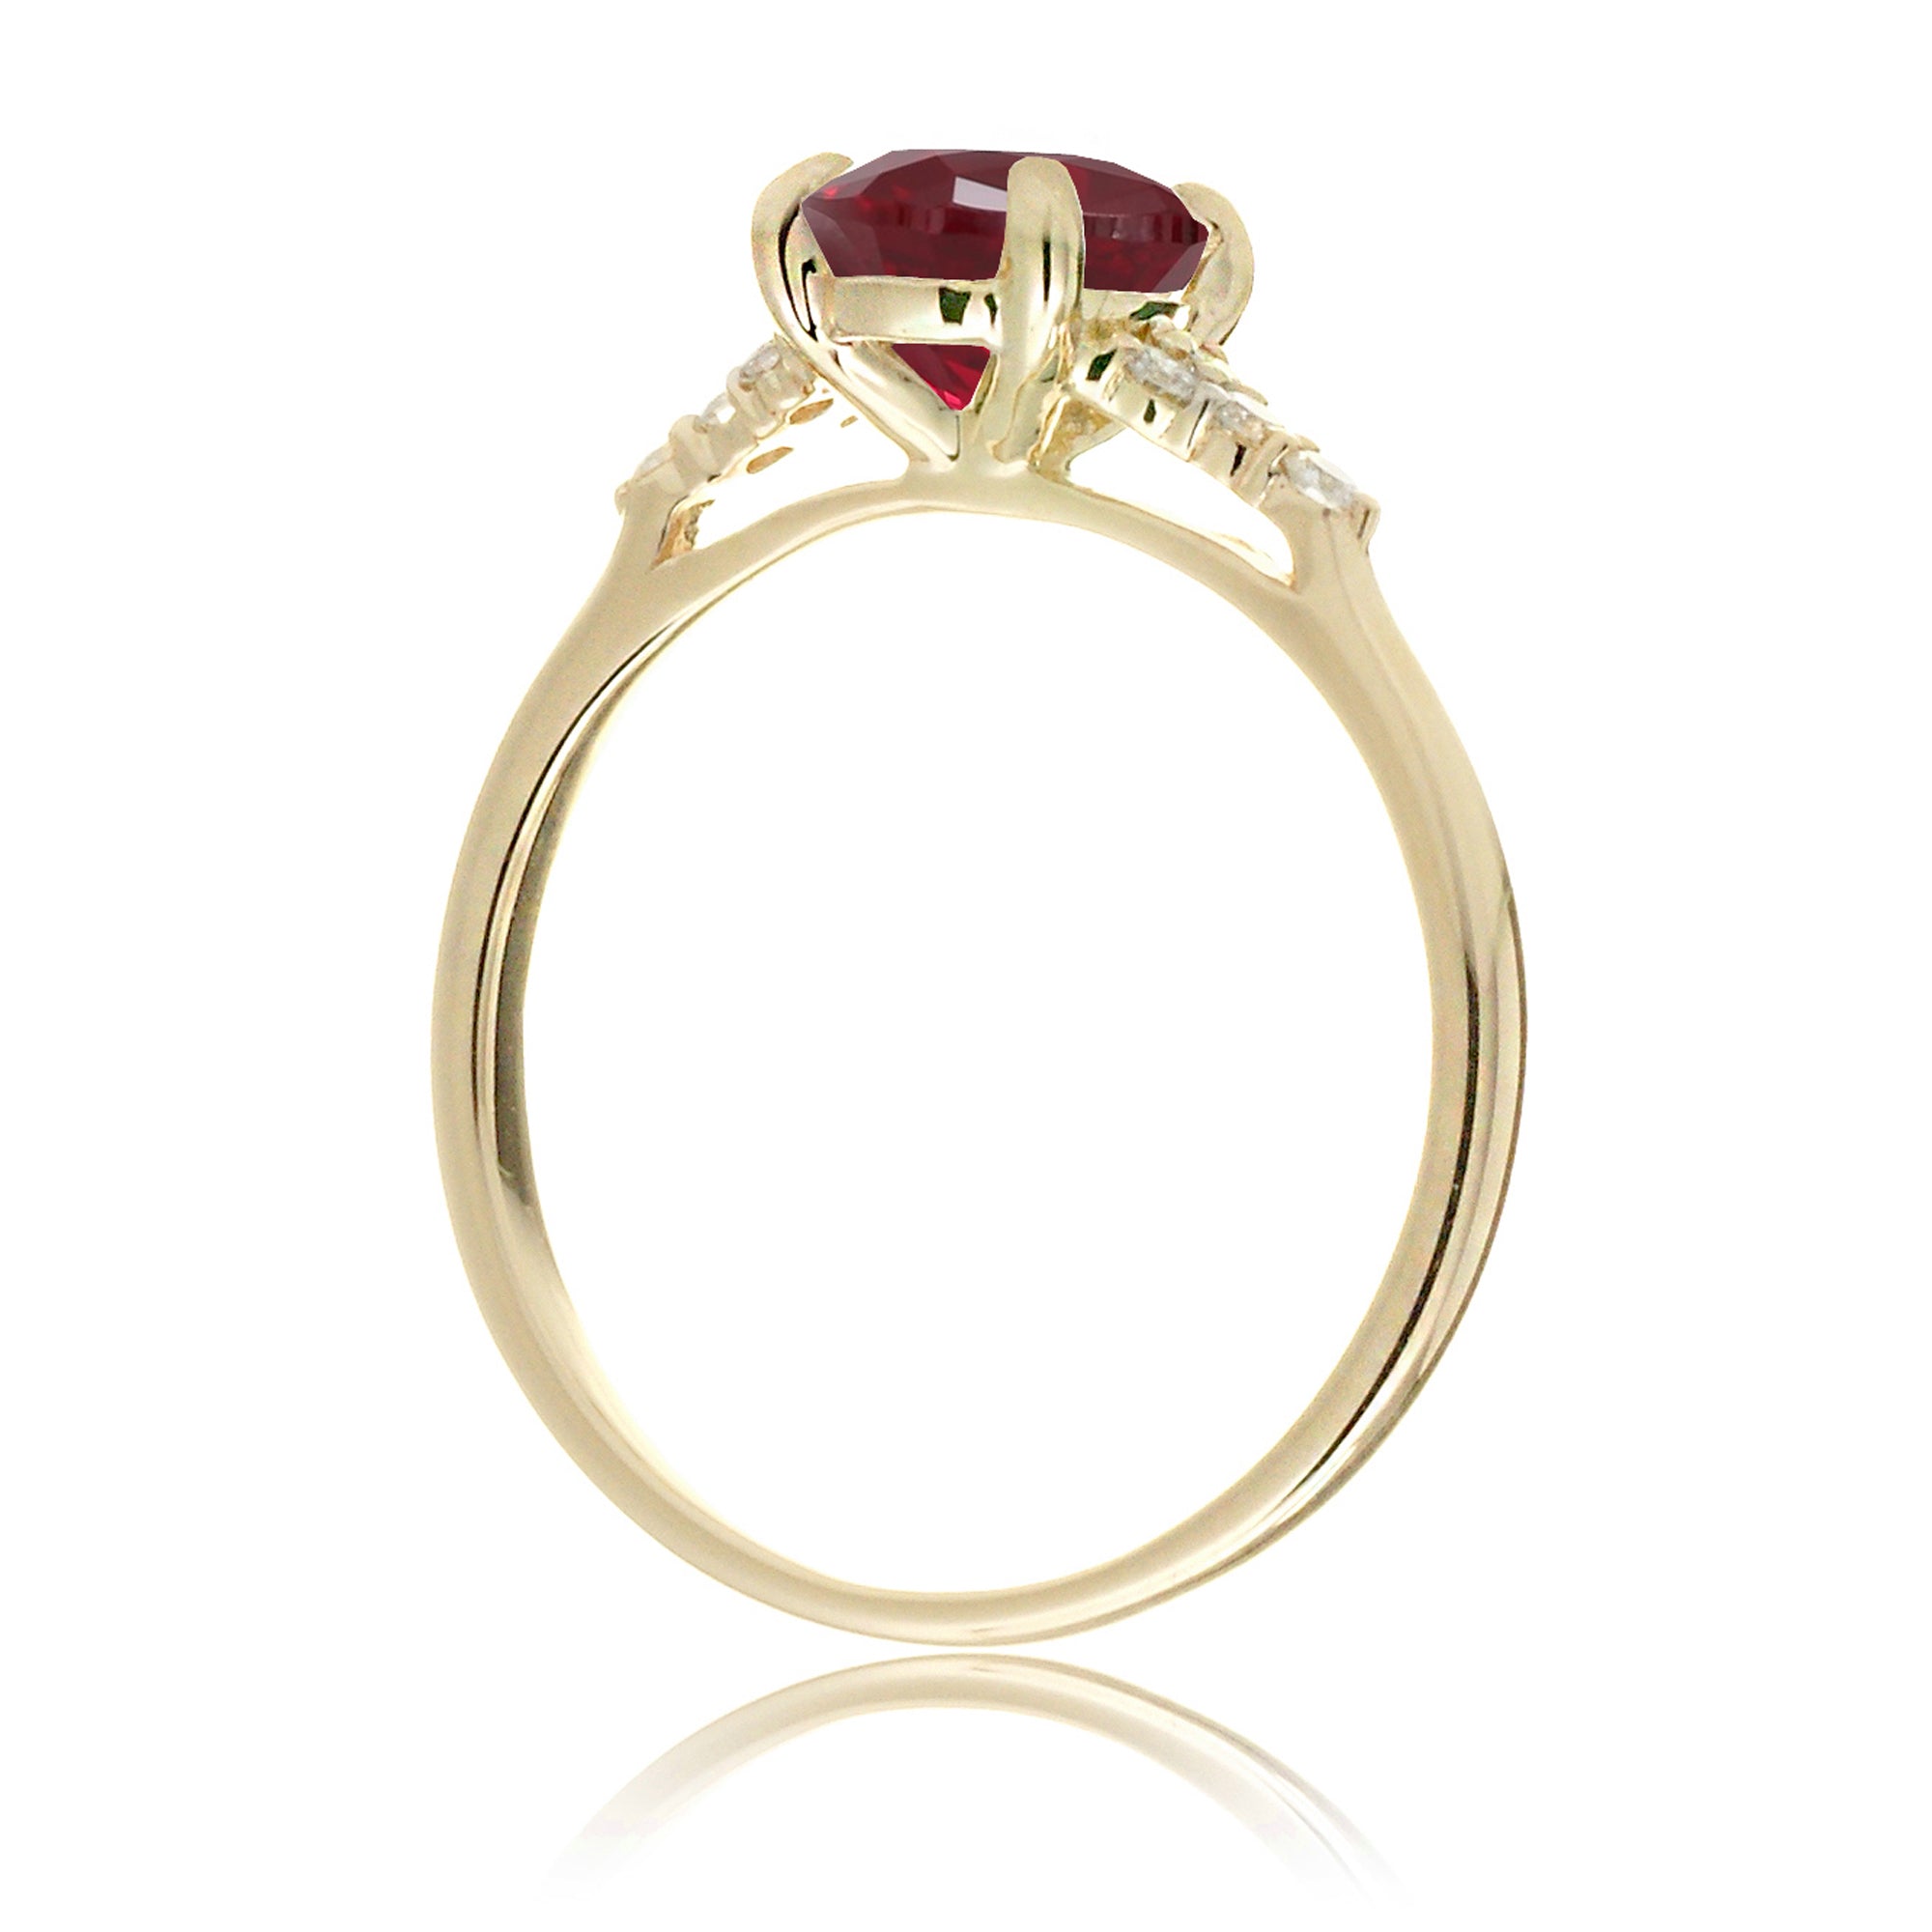 Pear cut ruby and diamond engagement ring in yellow gold - the Chloe lab-grown